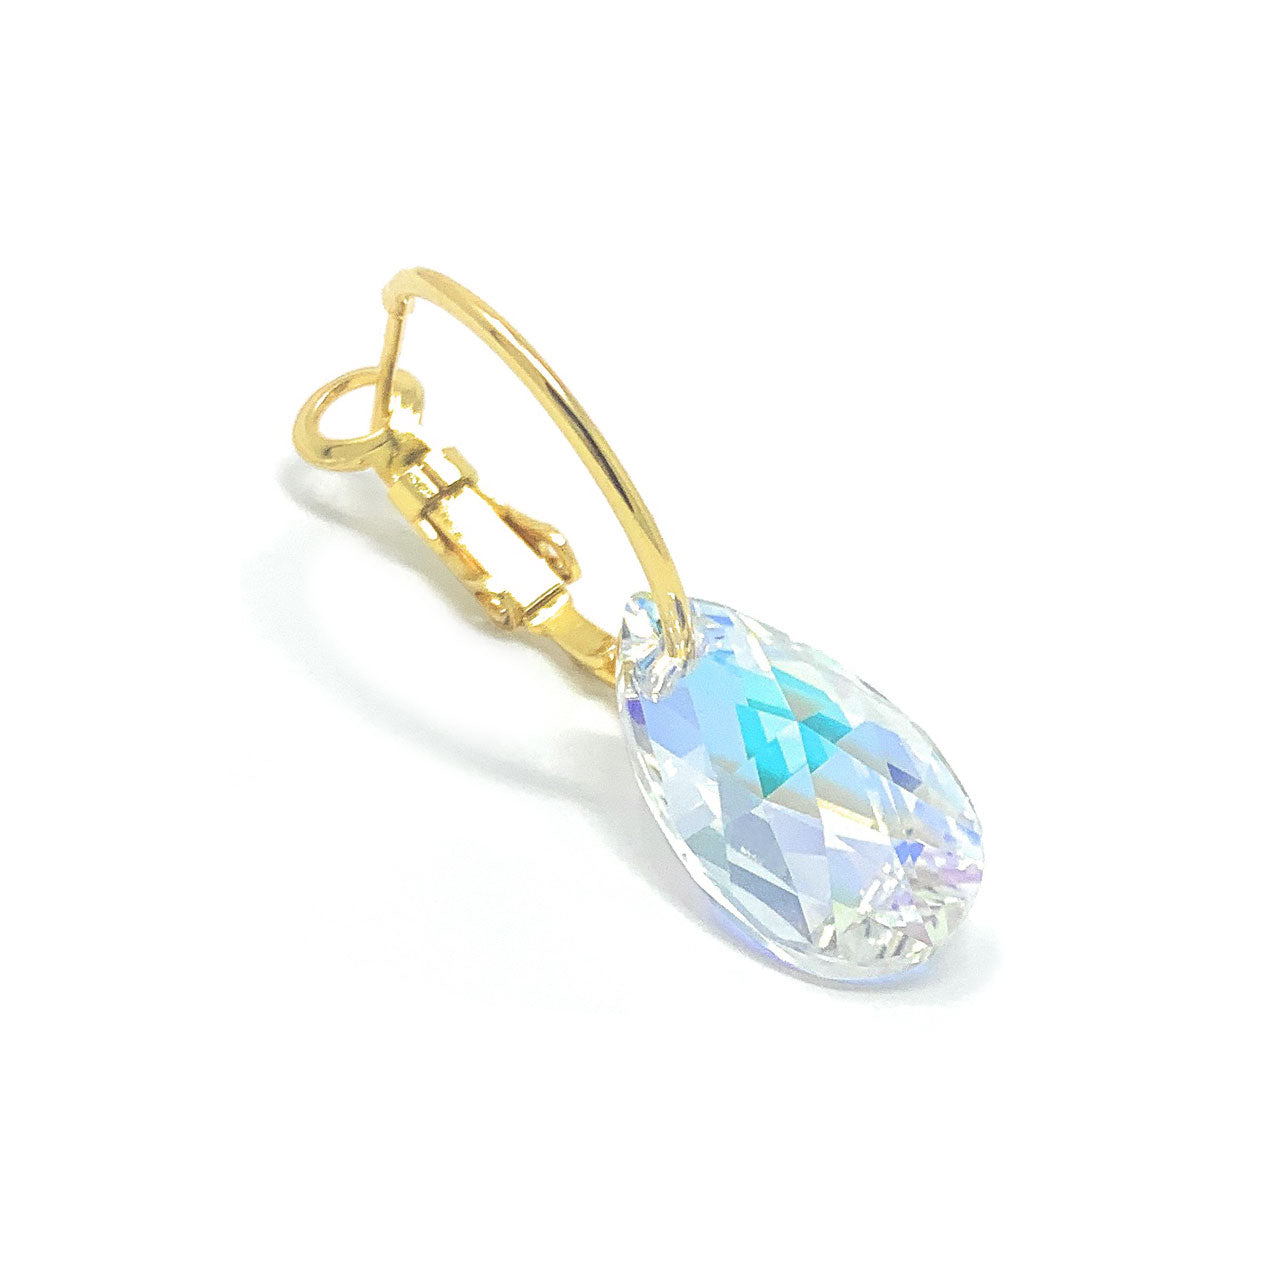 Aurora Small Drop Earrings with Clear Multicolor Aurore Boreale Pear Crystals from Swarovski Gold Plated - Ed Heart